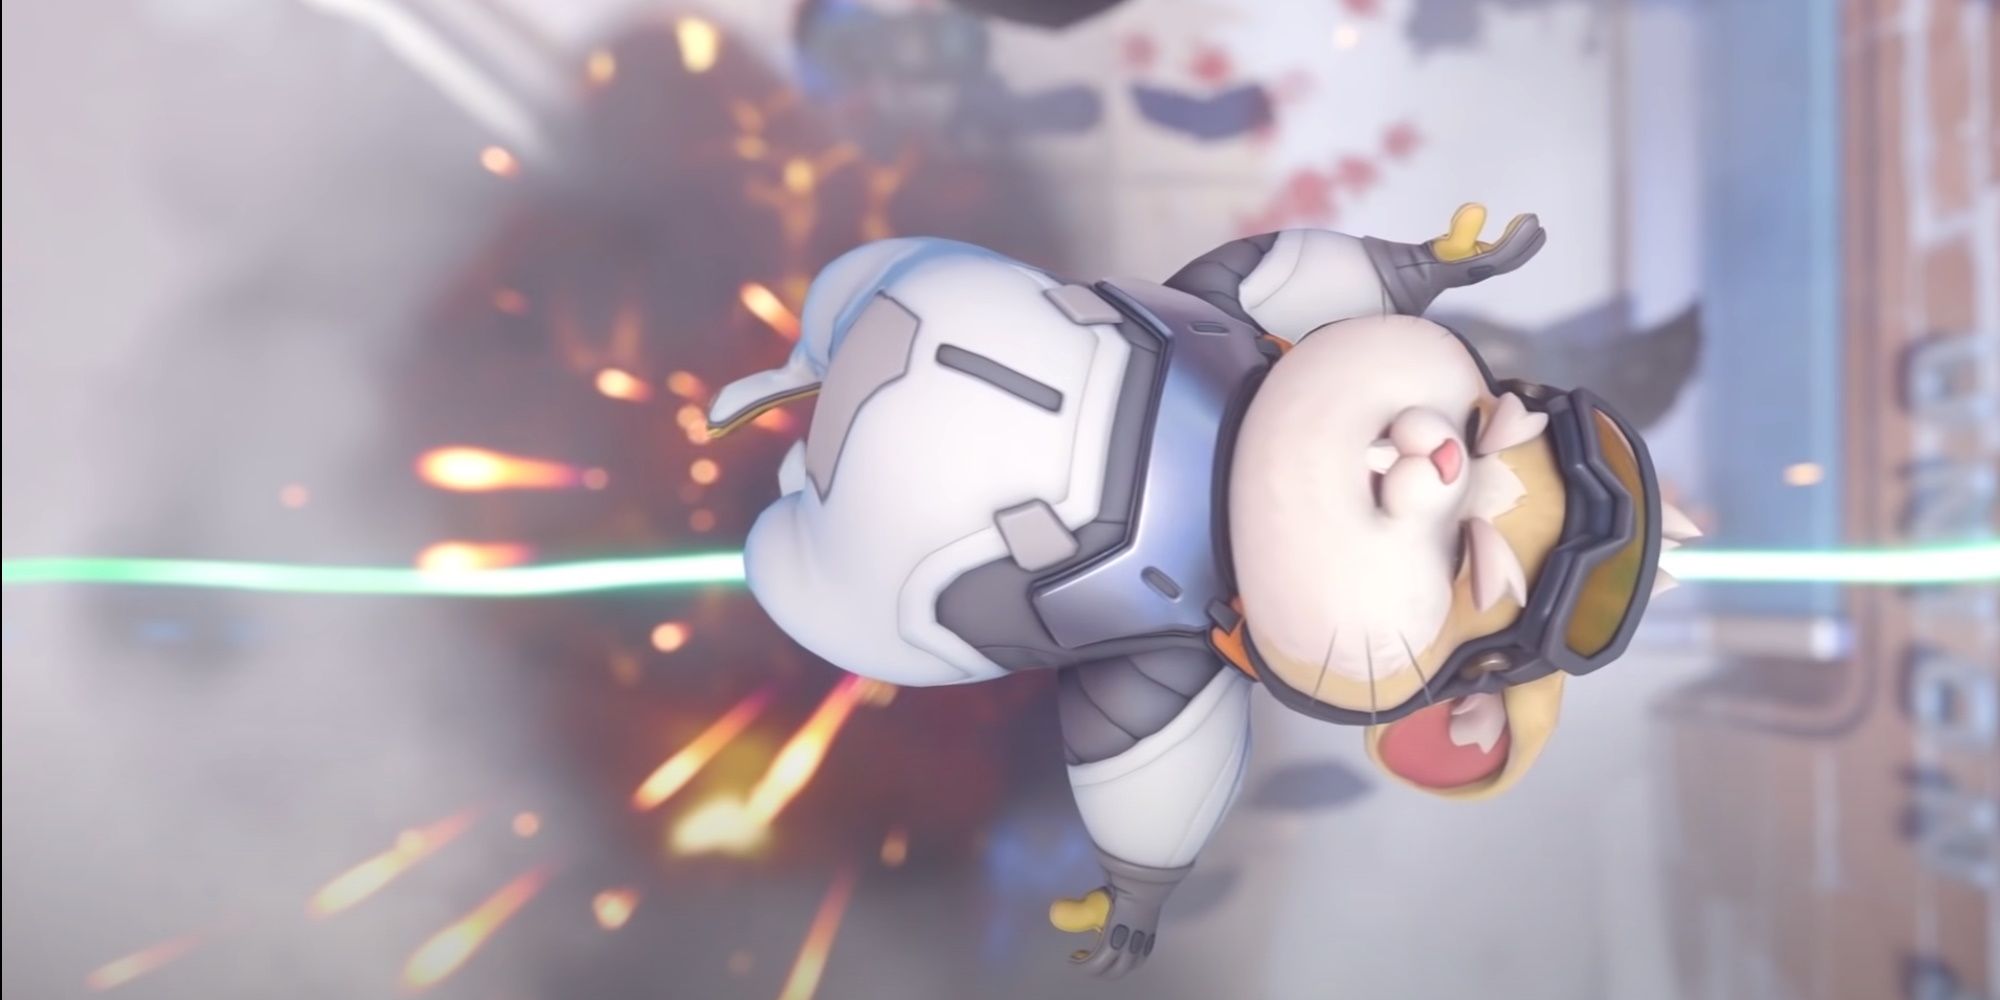 Overwatch character Wrecking Ball, or Hammond, is blown into the air